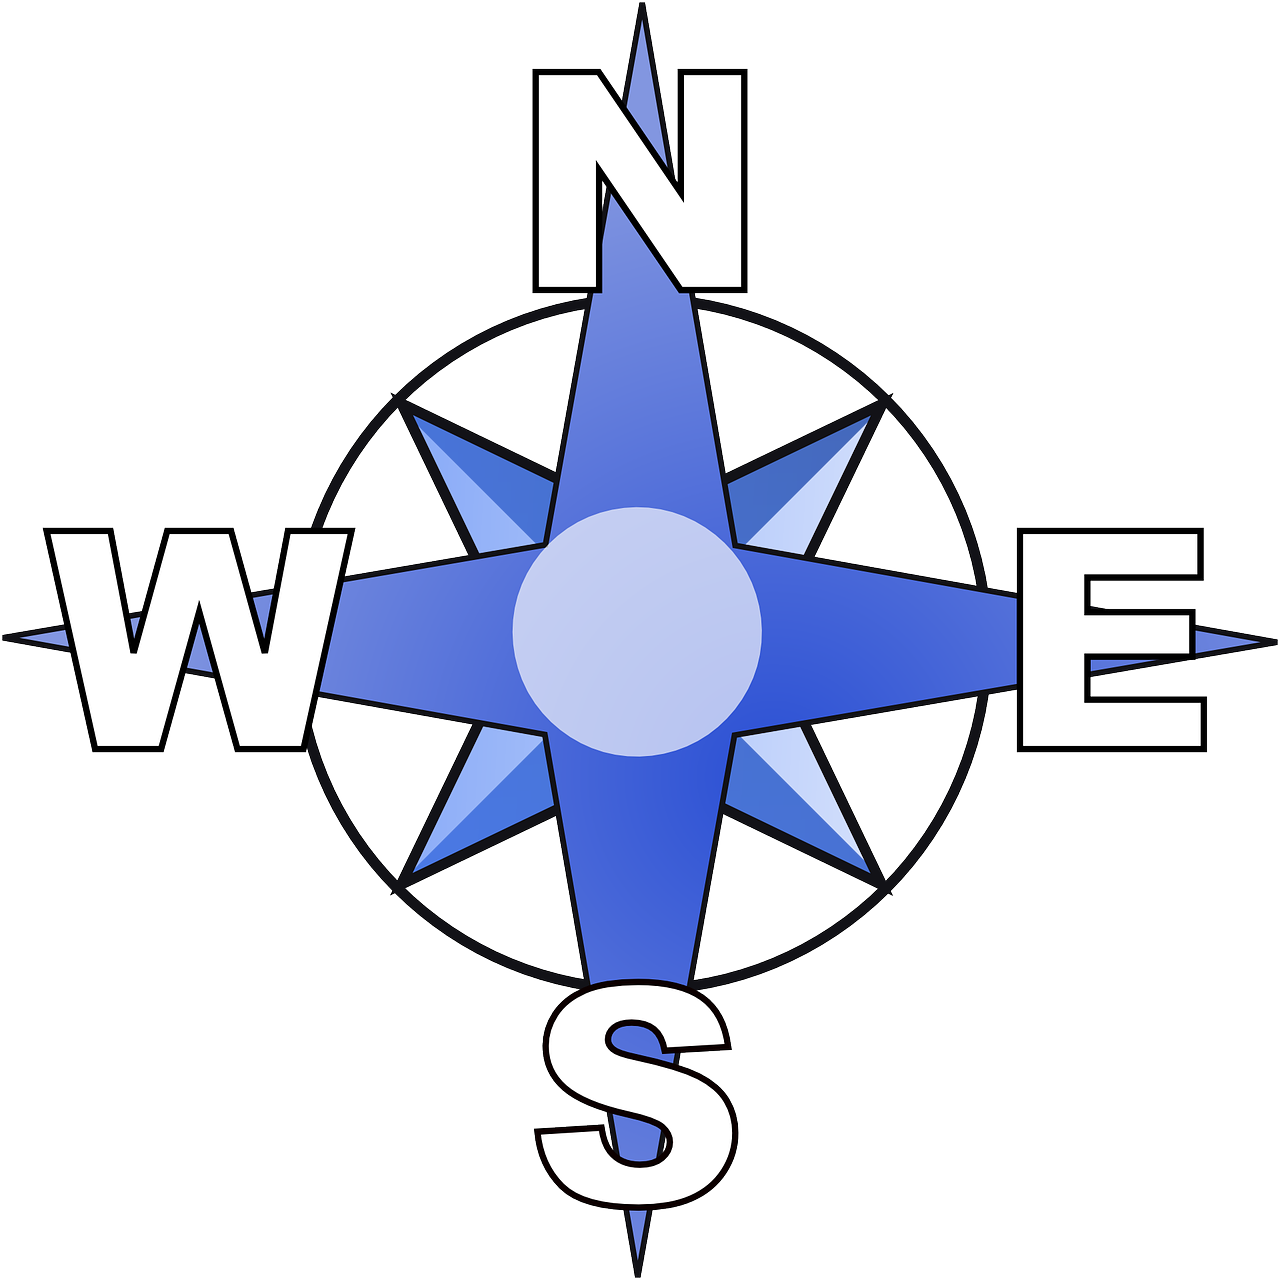 Compass rose Geography Cardinal direction North, compass, angle, text png